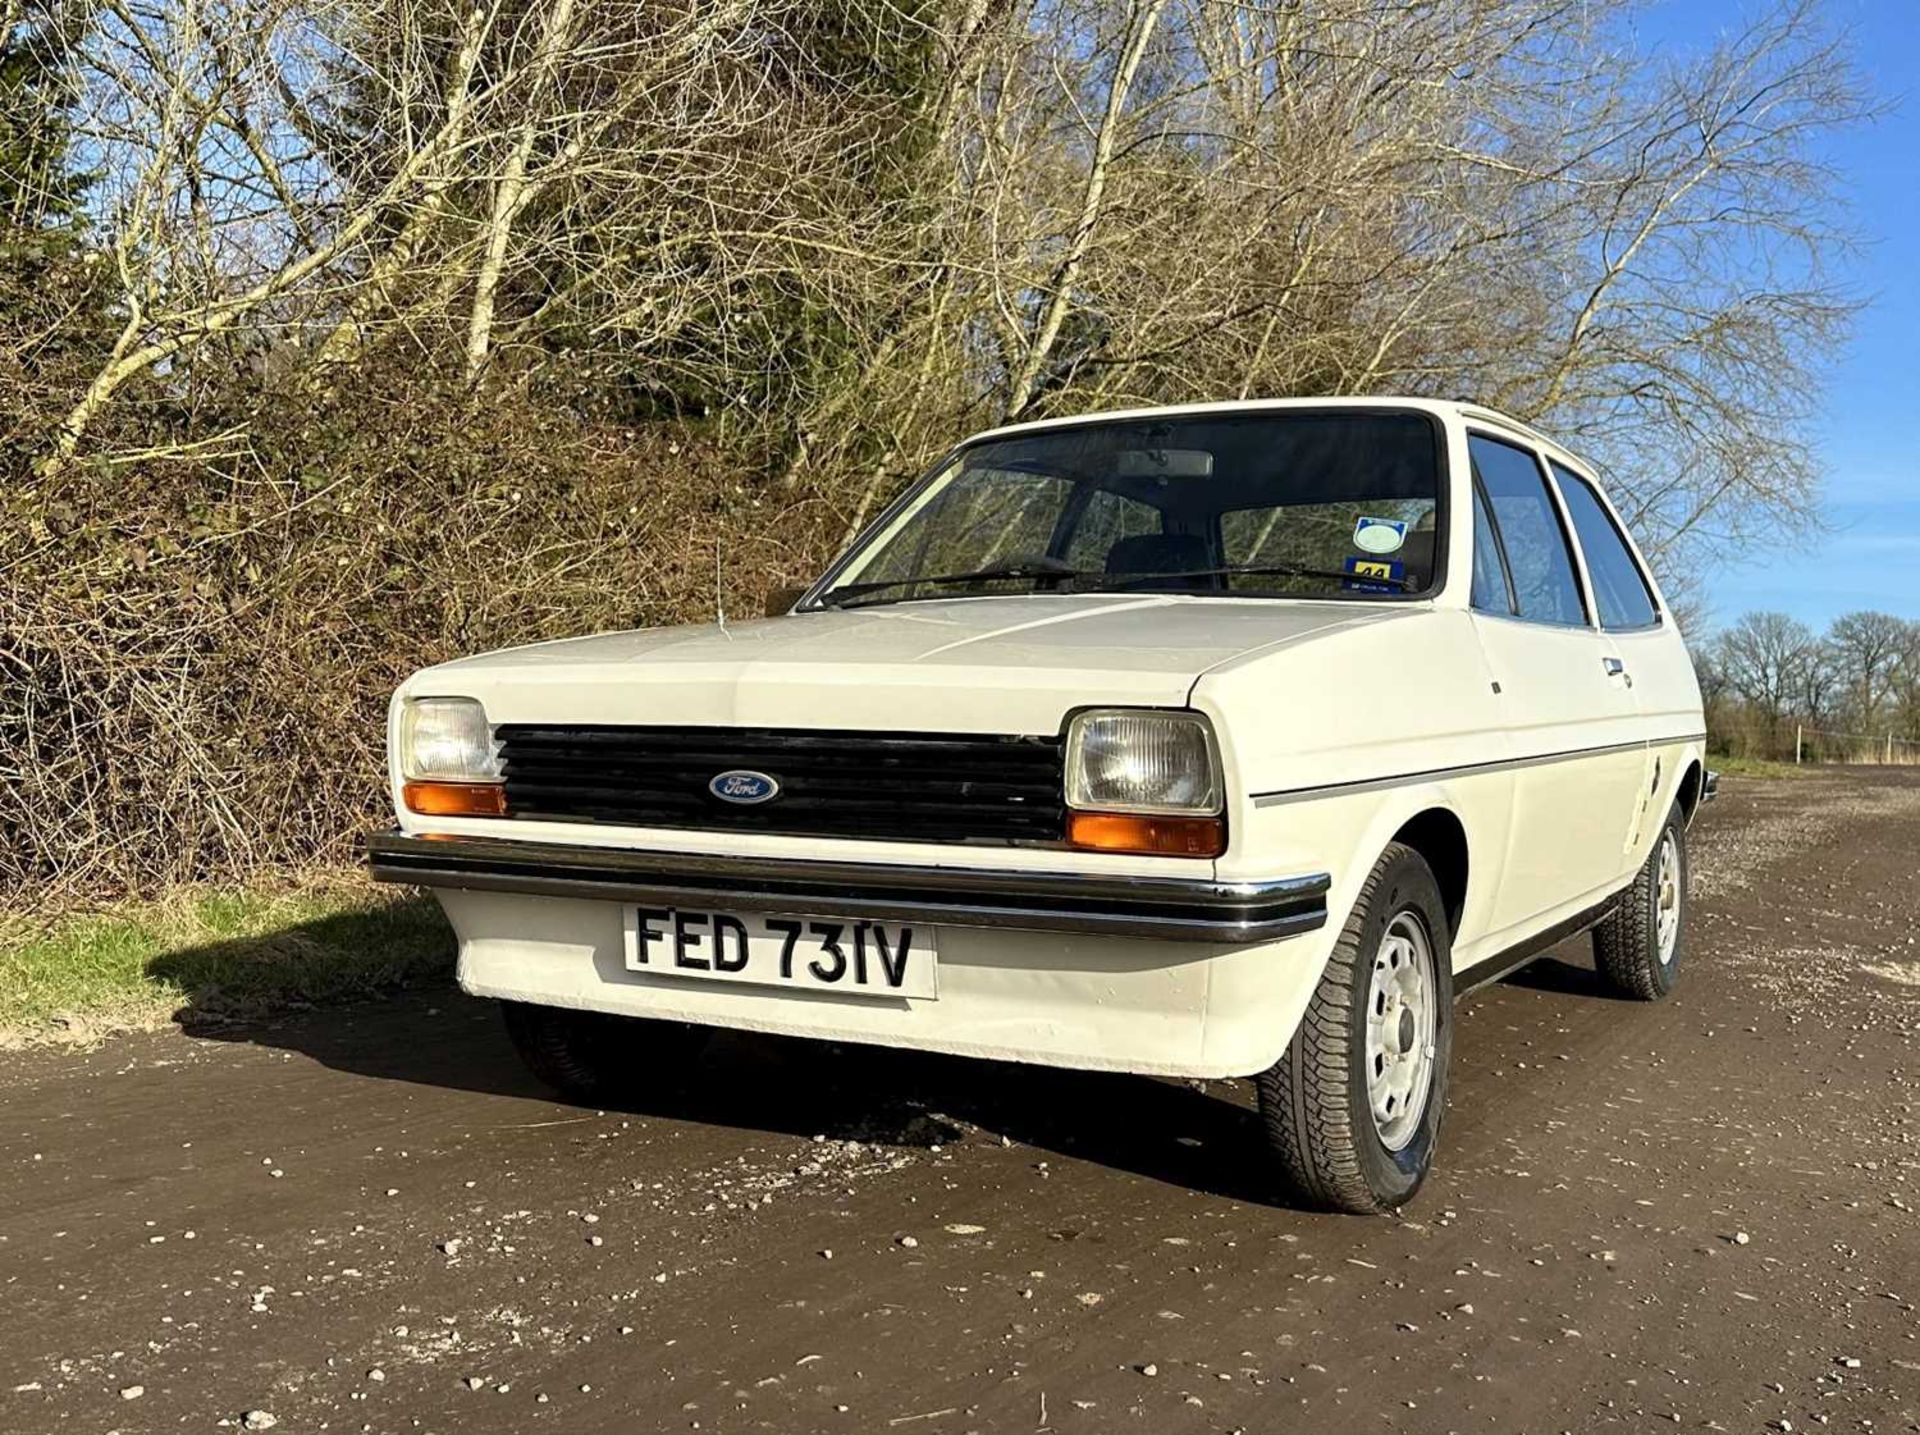 1979 Ford Fiesta 1.1L Same owner since 1982 *** NO RESERVE *** - Image 2 of 99